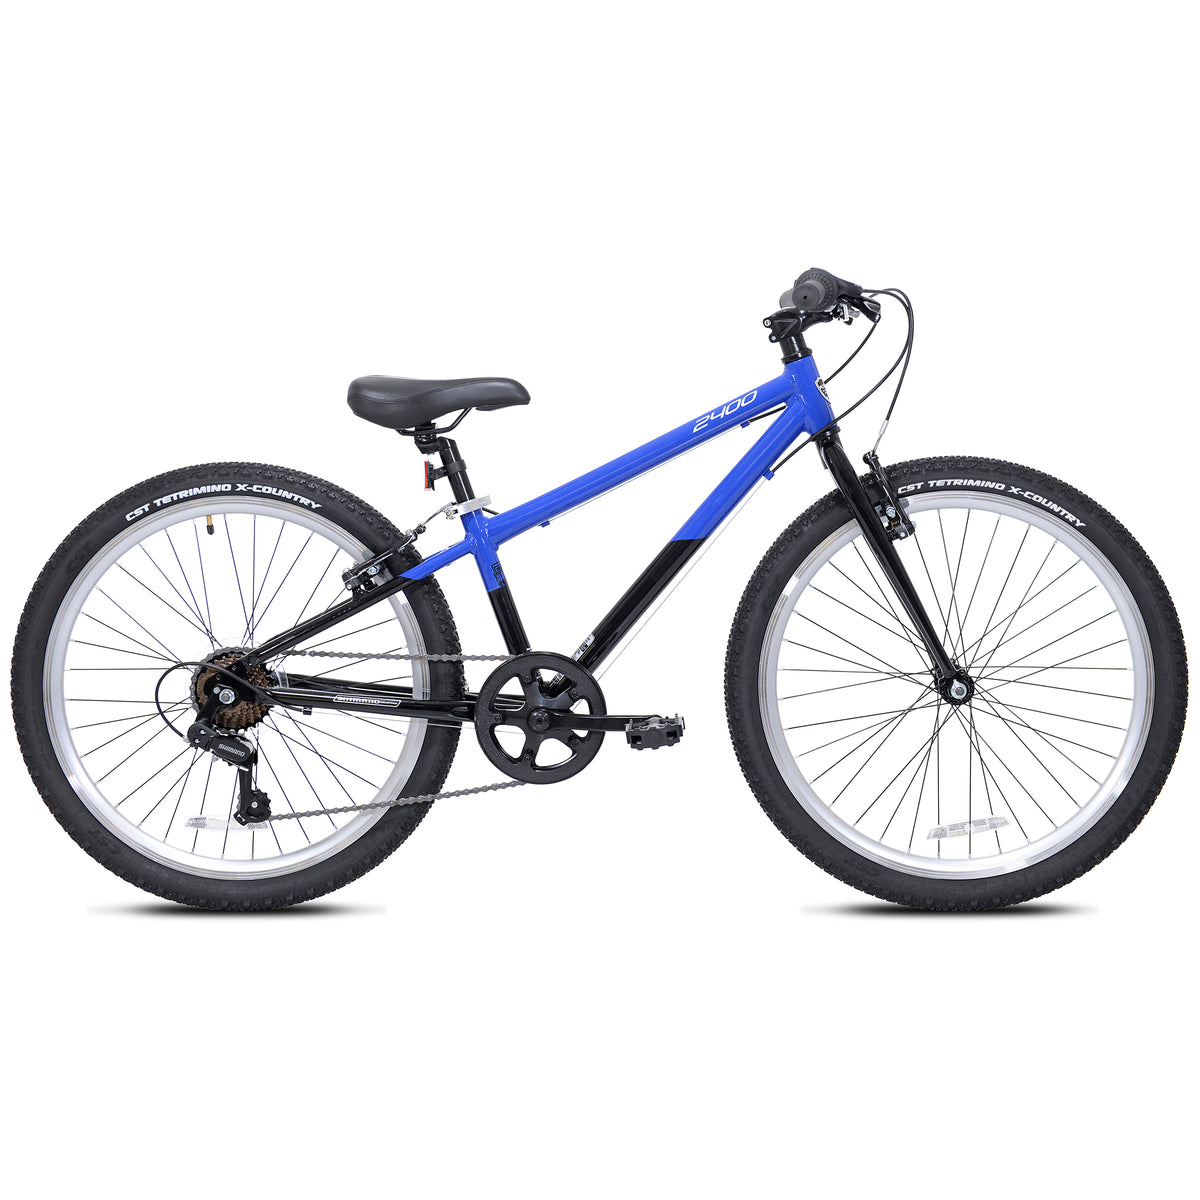 24" Kent 2400 | Mountain Bike for Kids Ages 8+